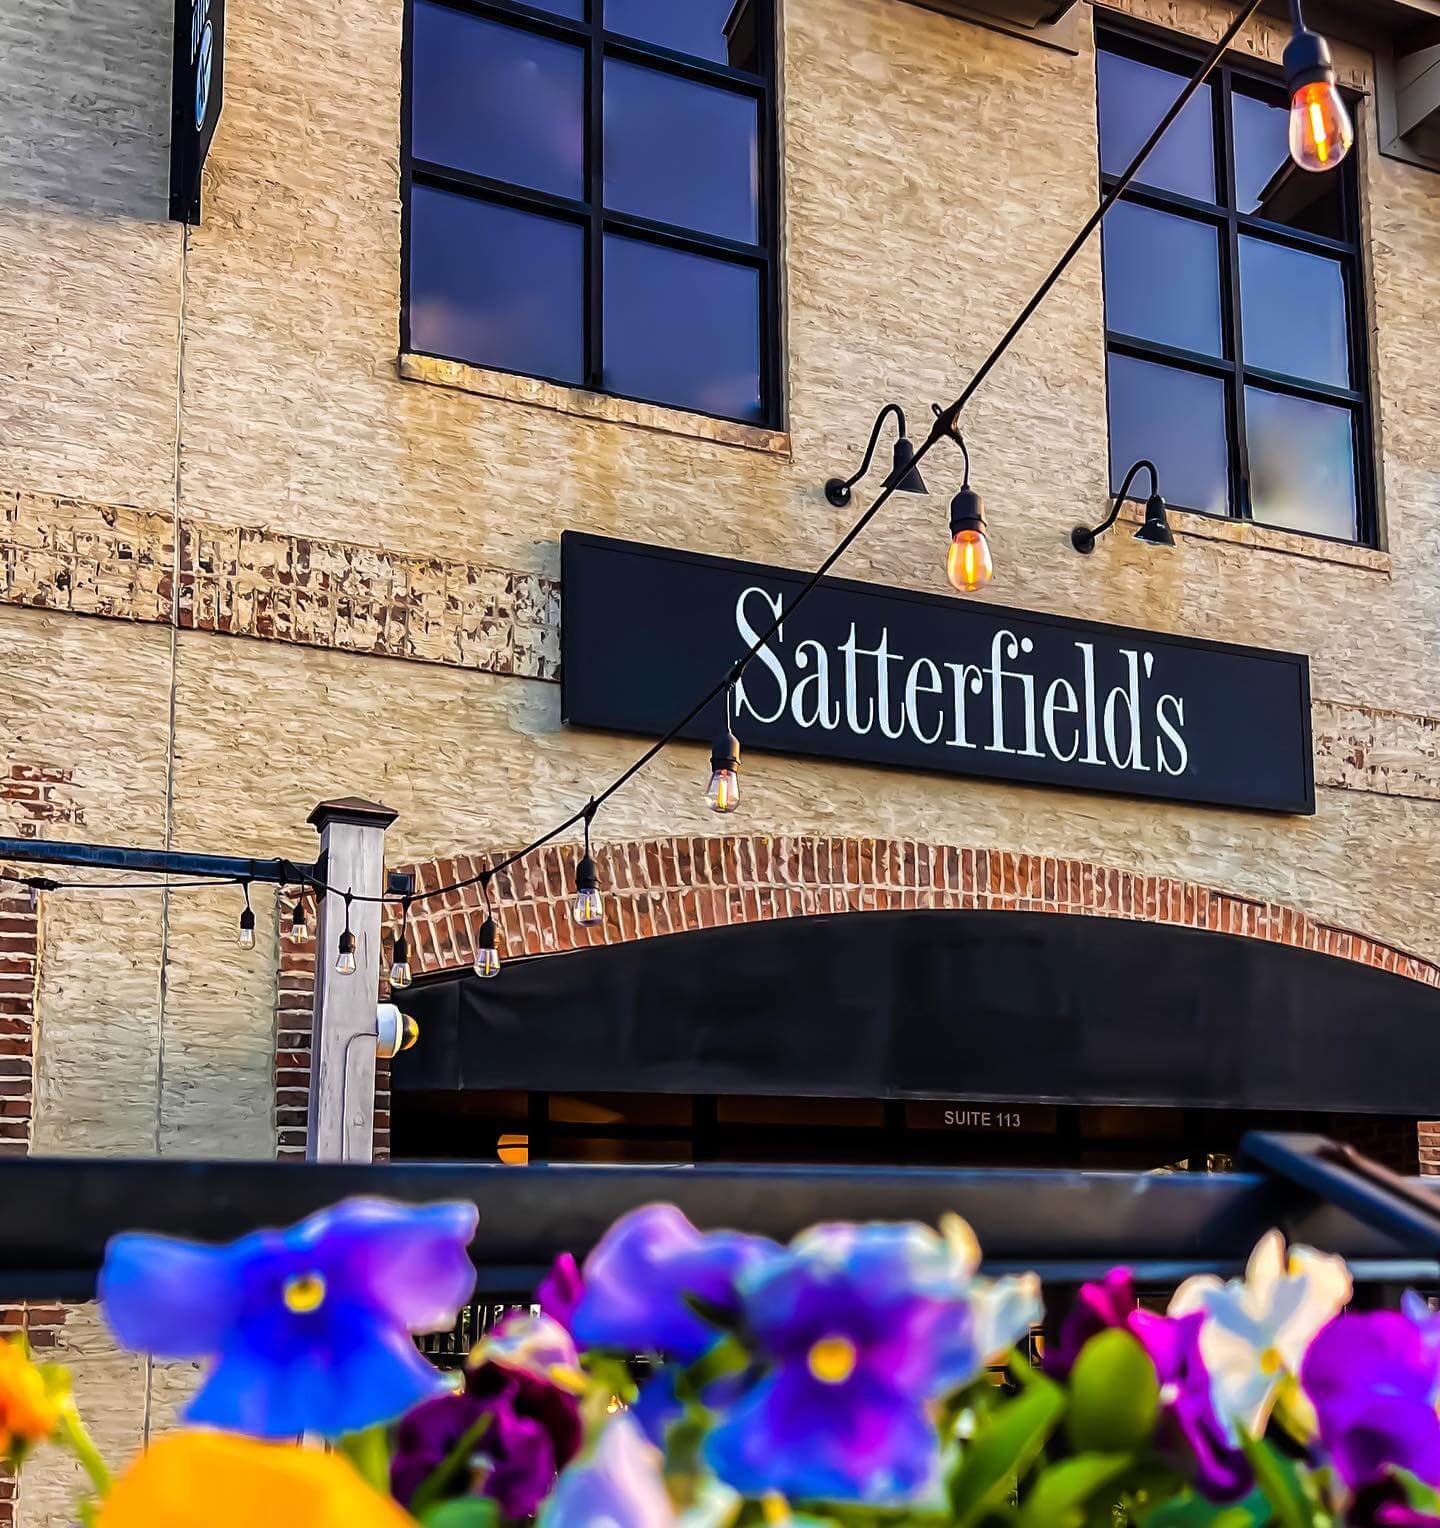 Exterior Satterfield's restaurant with pansies in the foreground